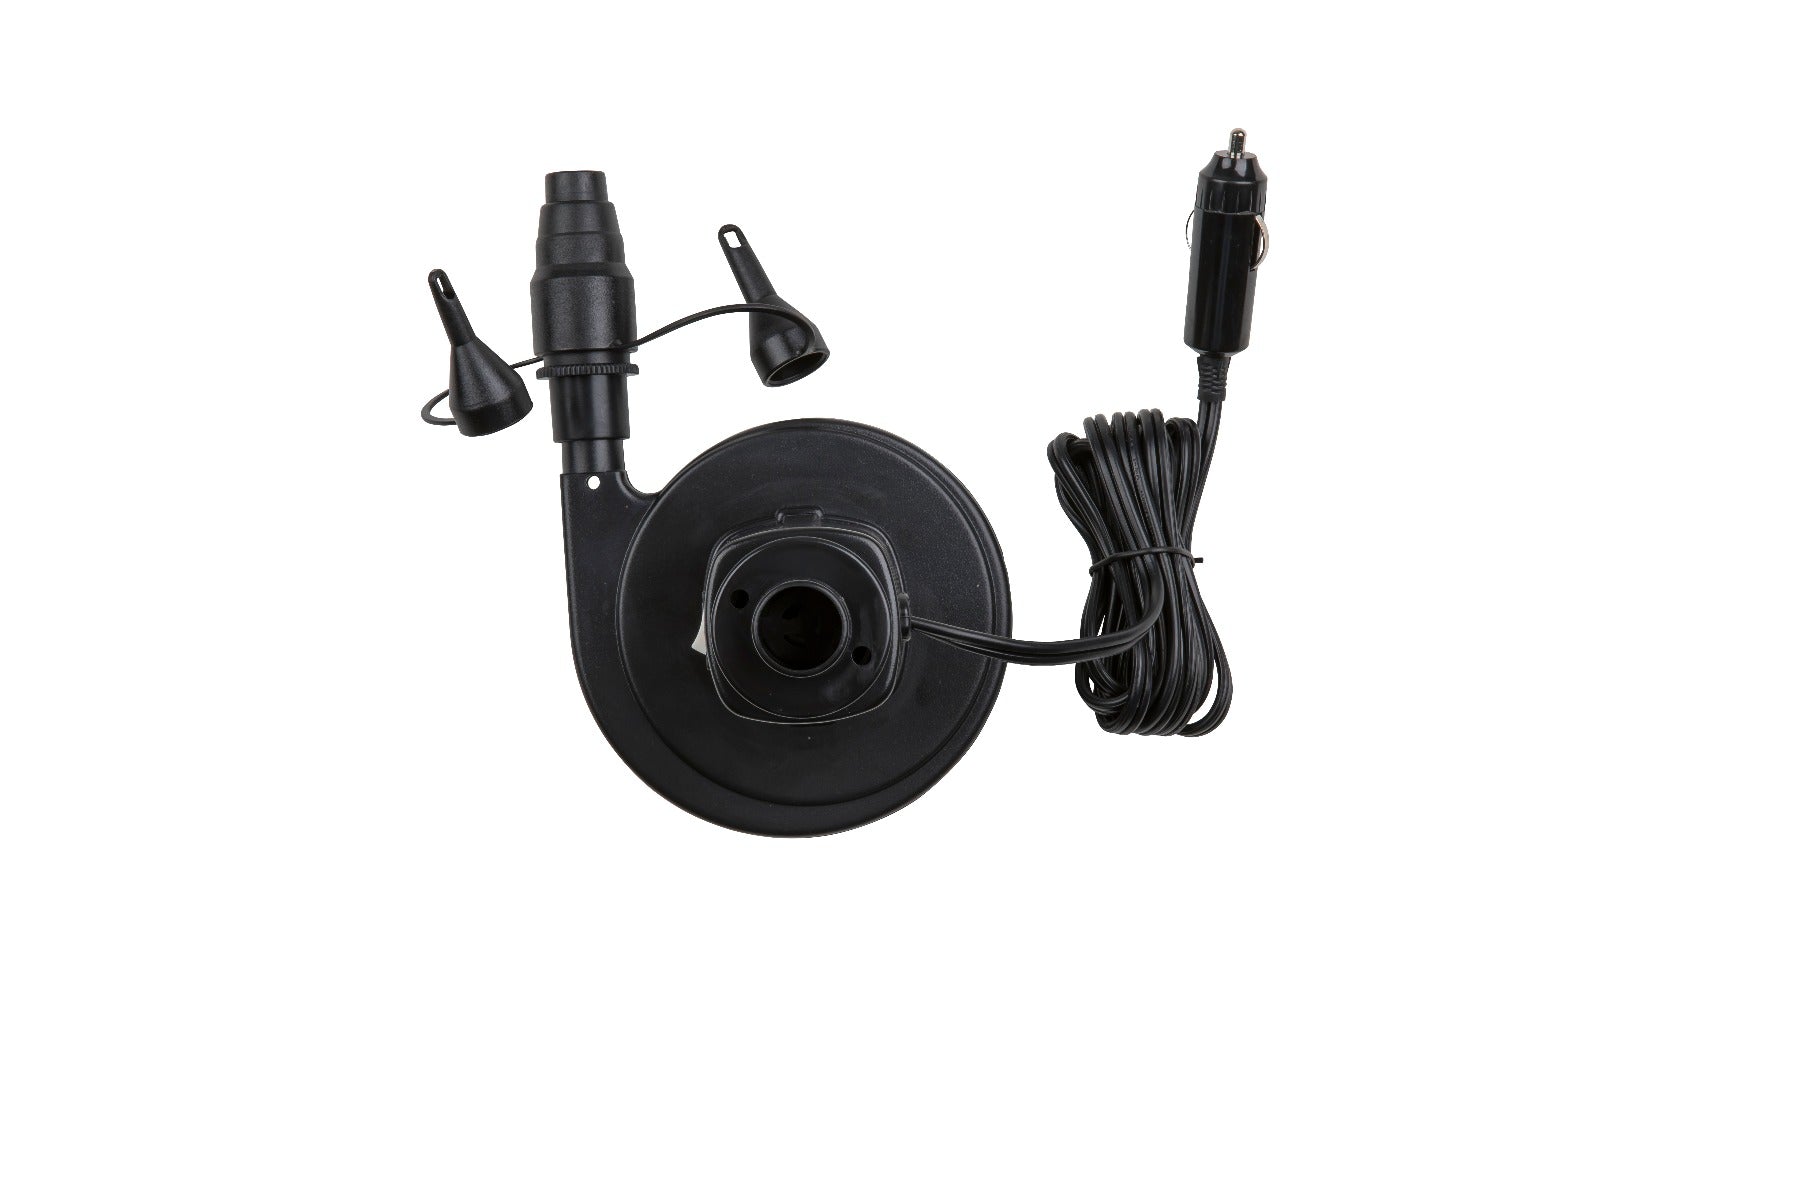 A black Radar car charger with a cord attached to it, offering 12V power and interchangeable adapters.